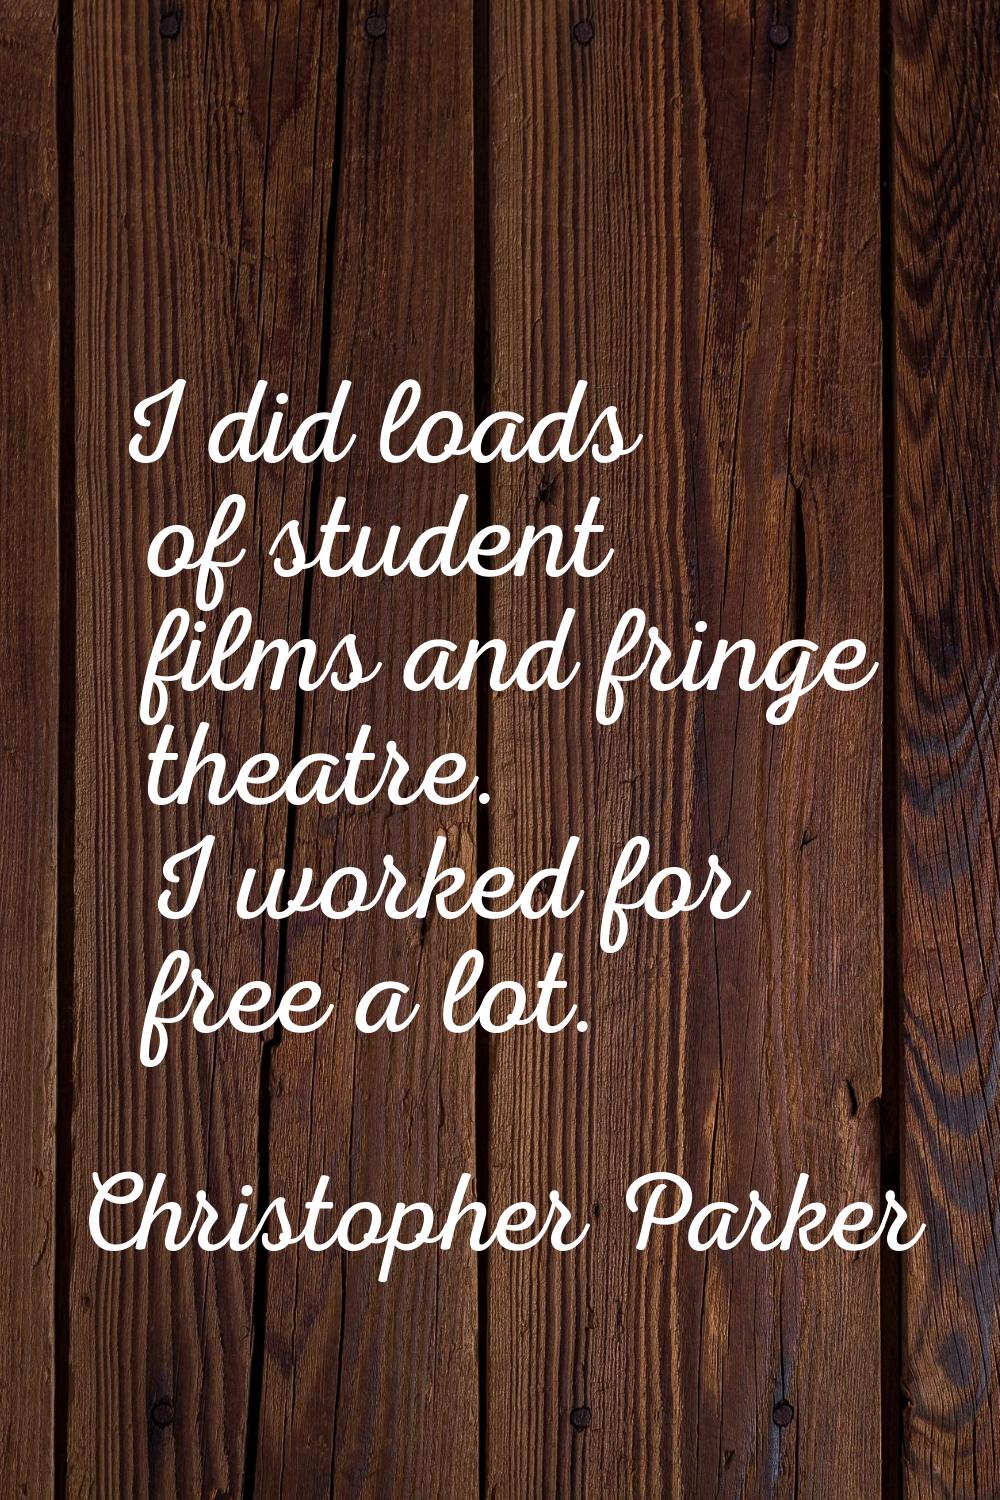 I did loads of student films and fringe theatre. I worked for free a lot.